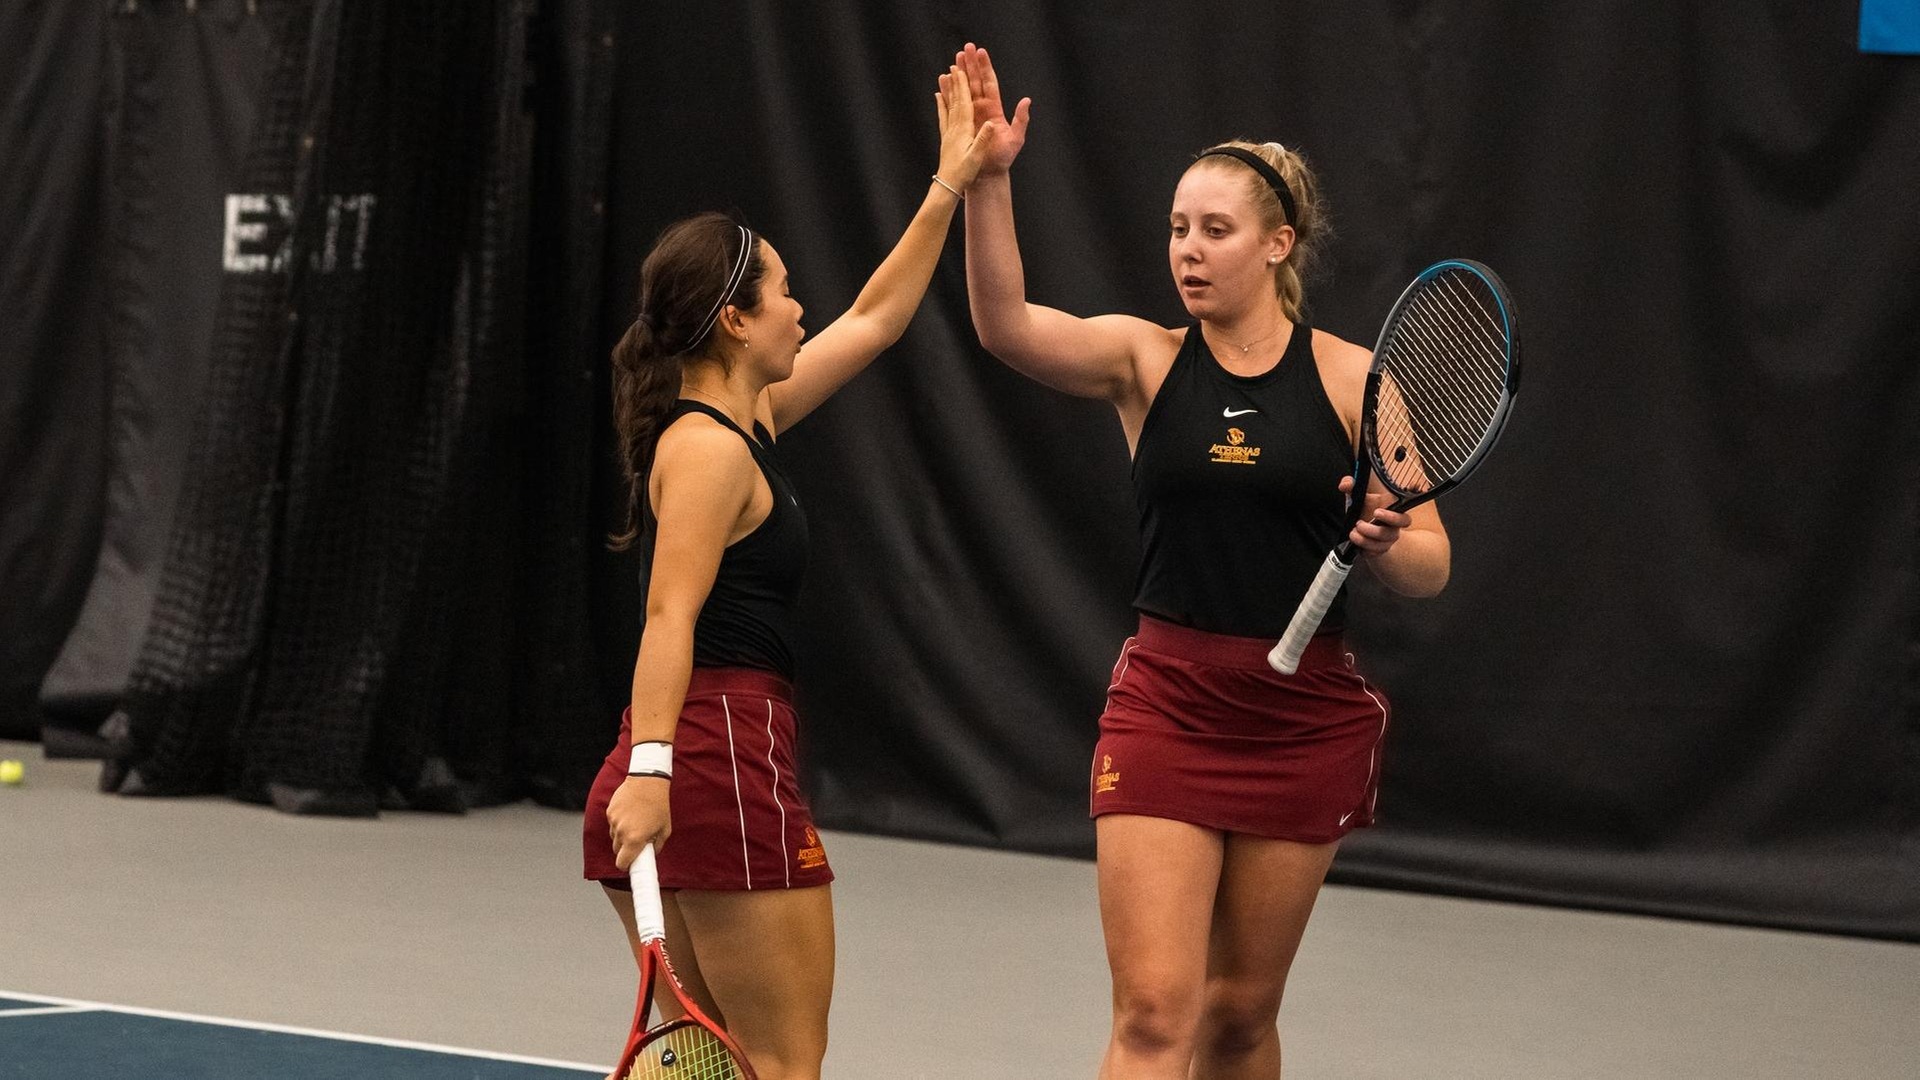 Sena Selby and Katherine Wurster won in a tiebreaker in doubles